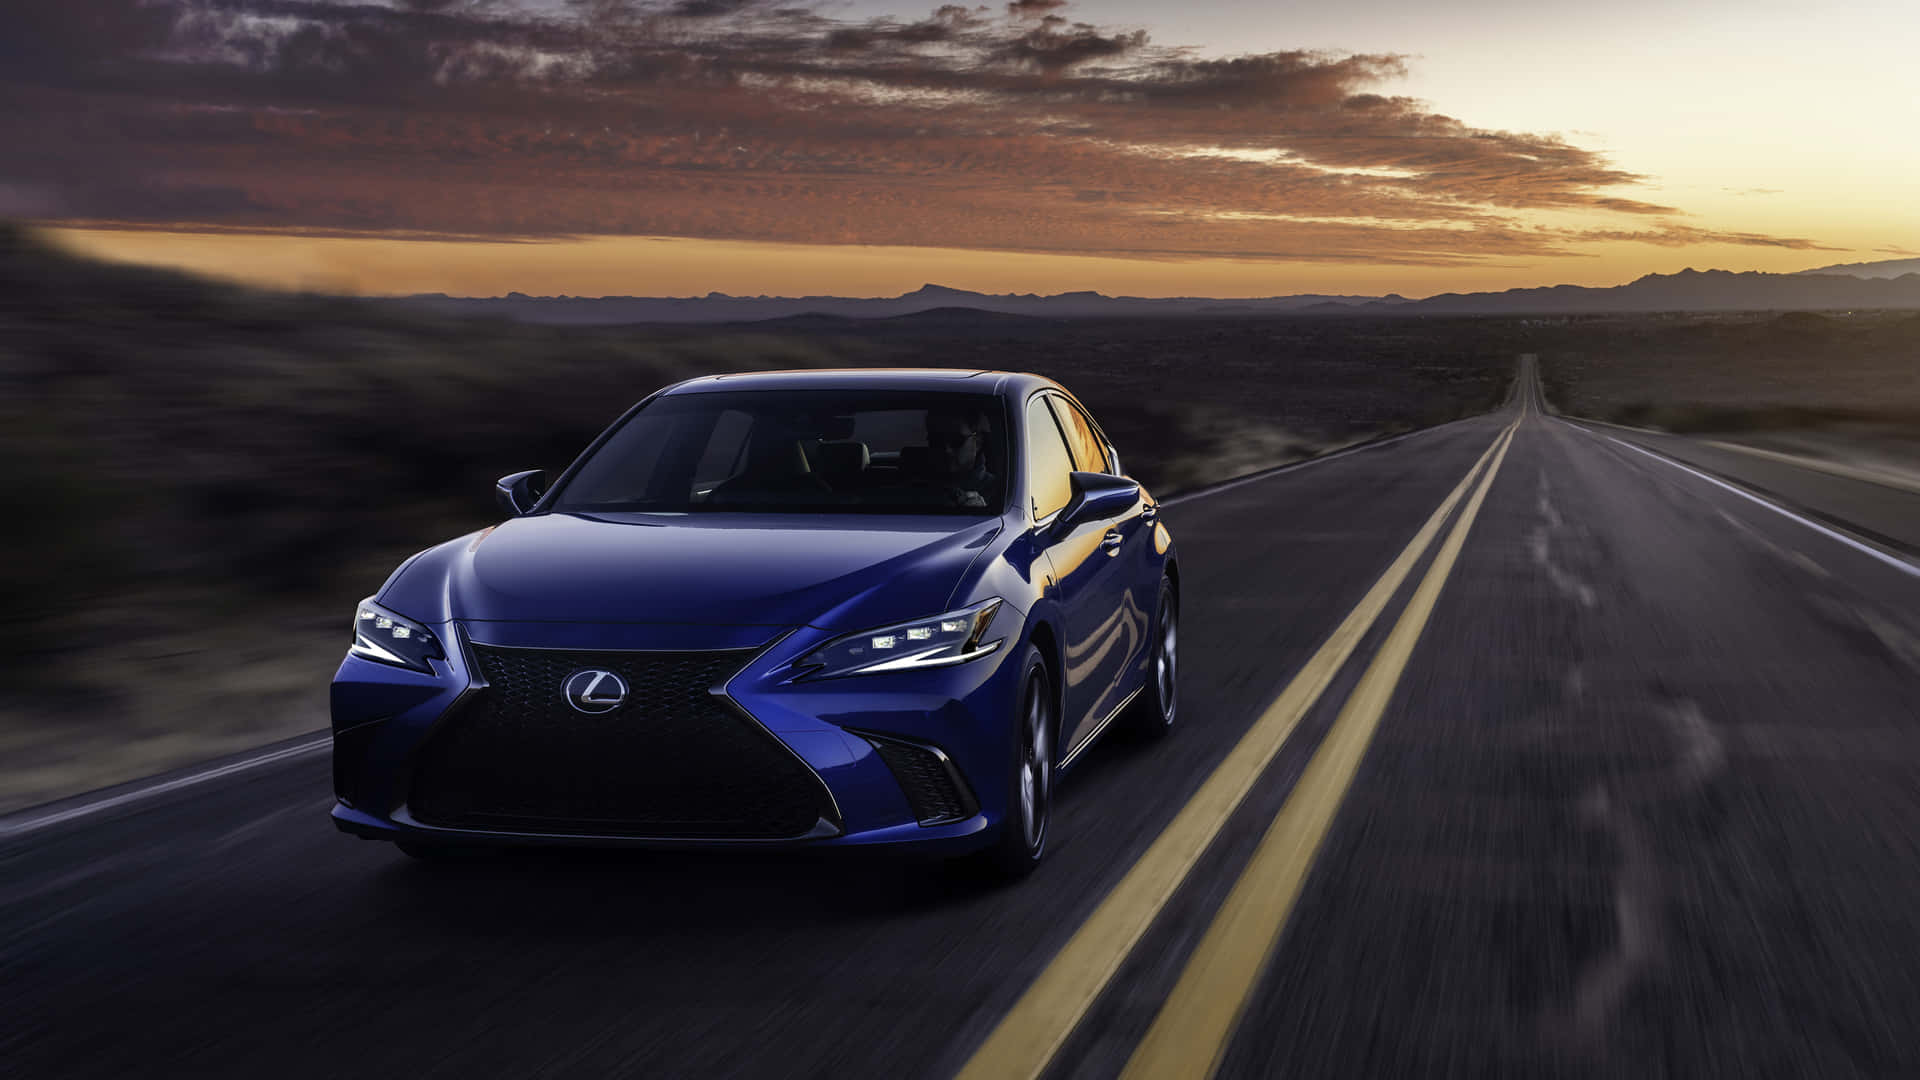 The 2019 Lexus Cs Driving Down A Road At Sunset Wallpaper